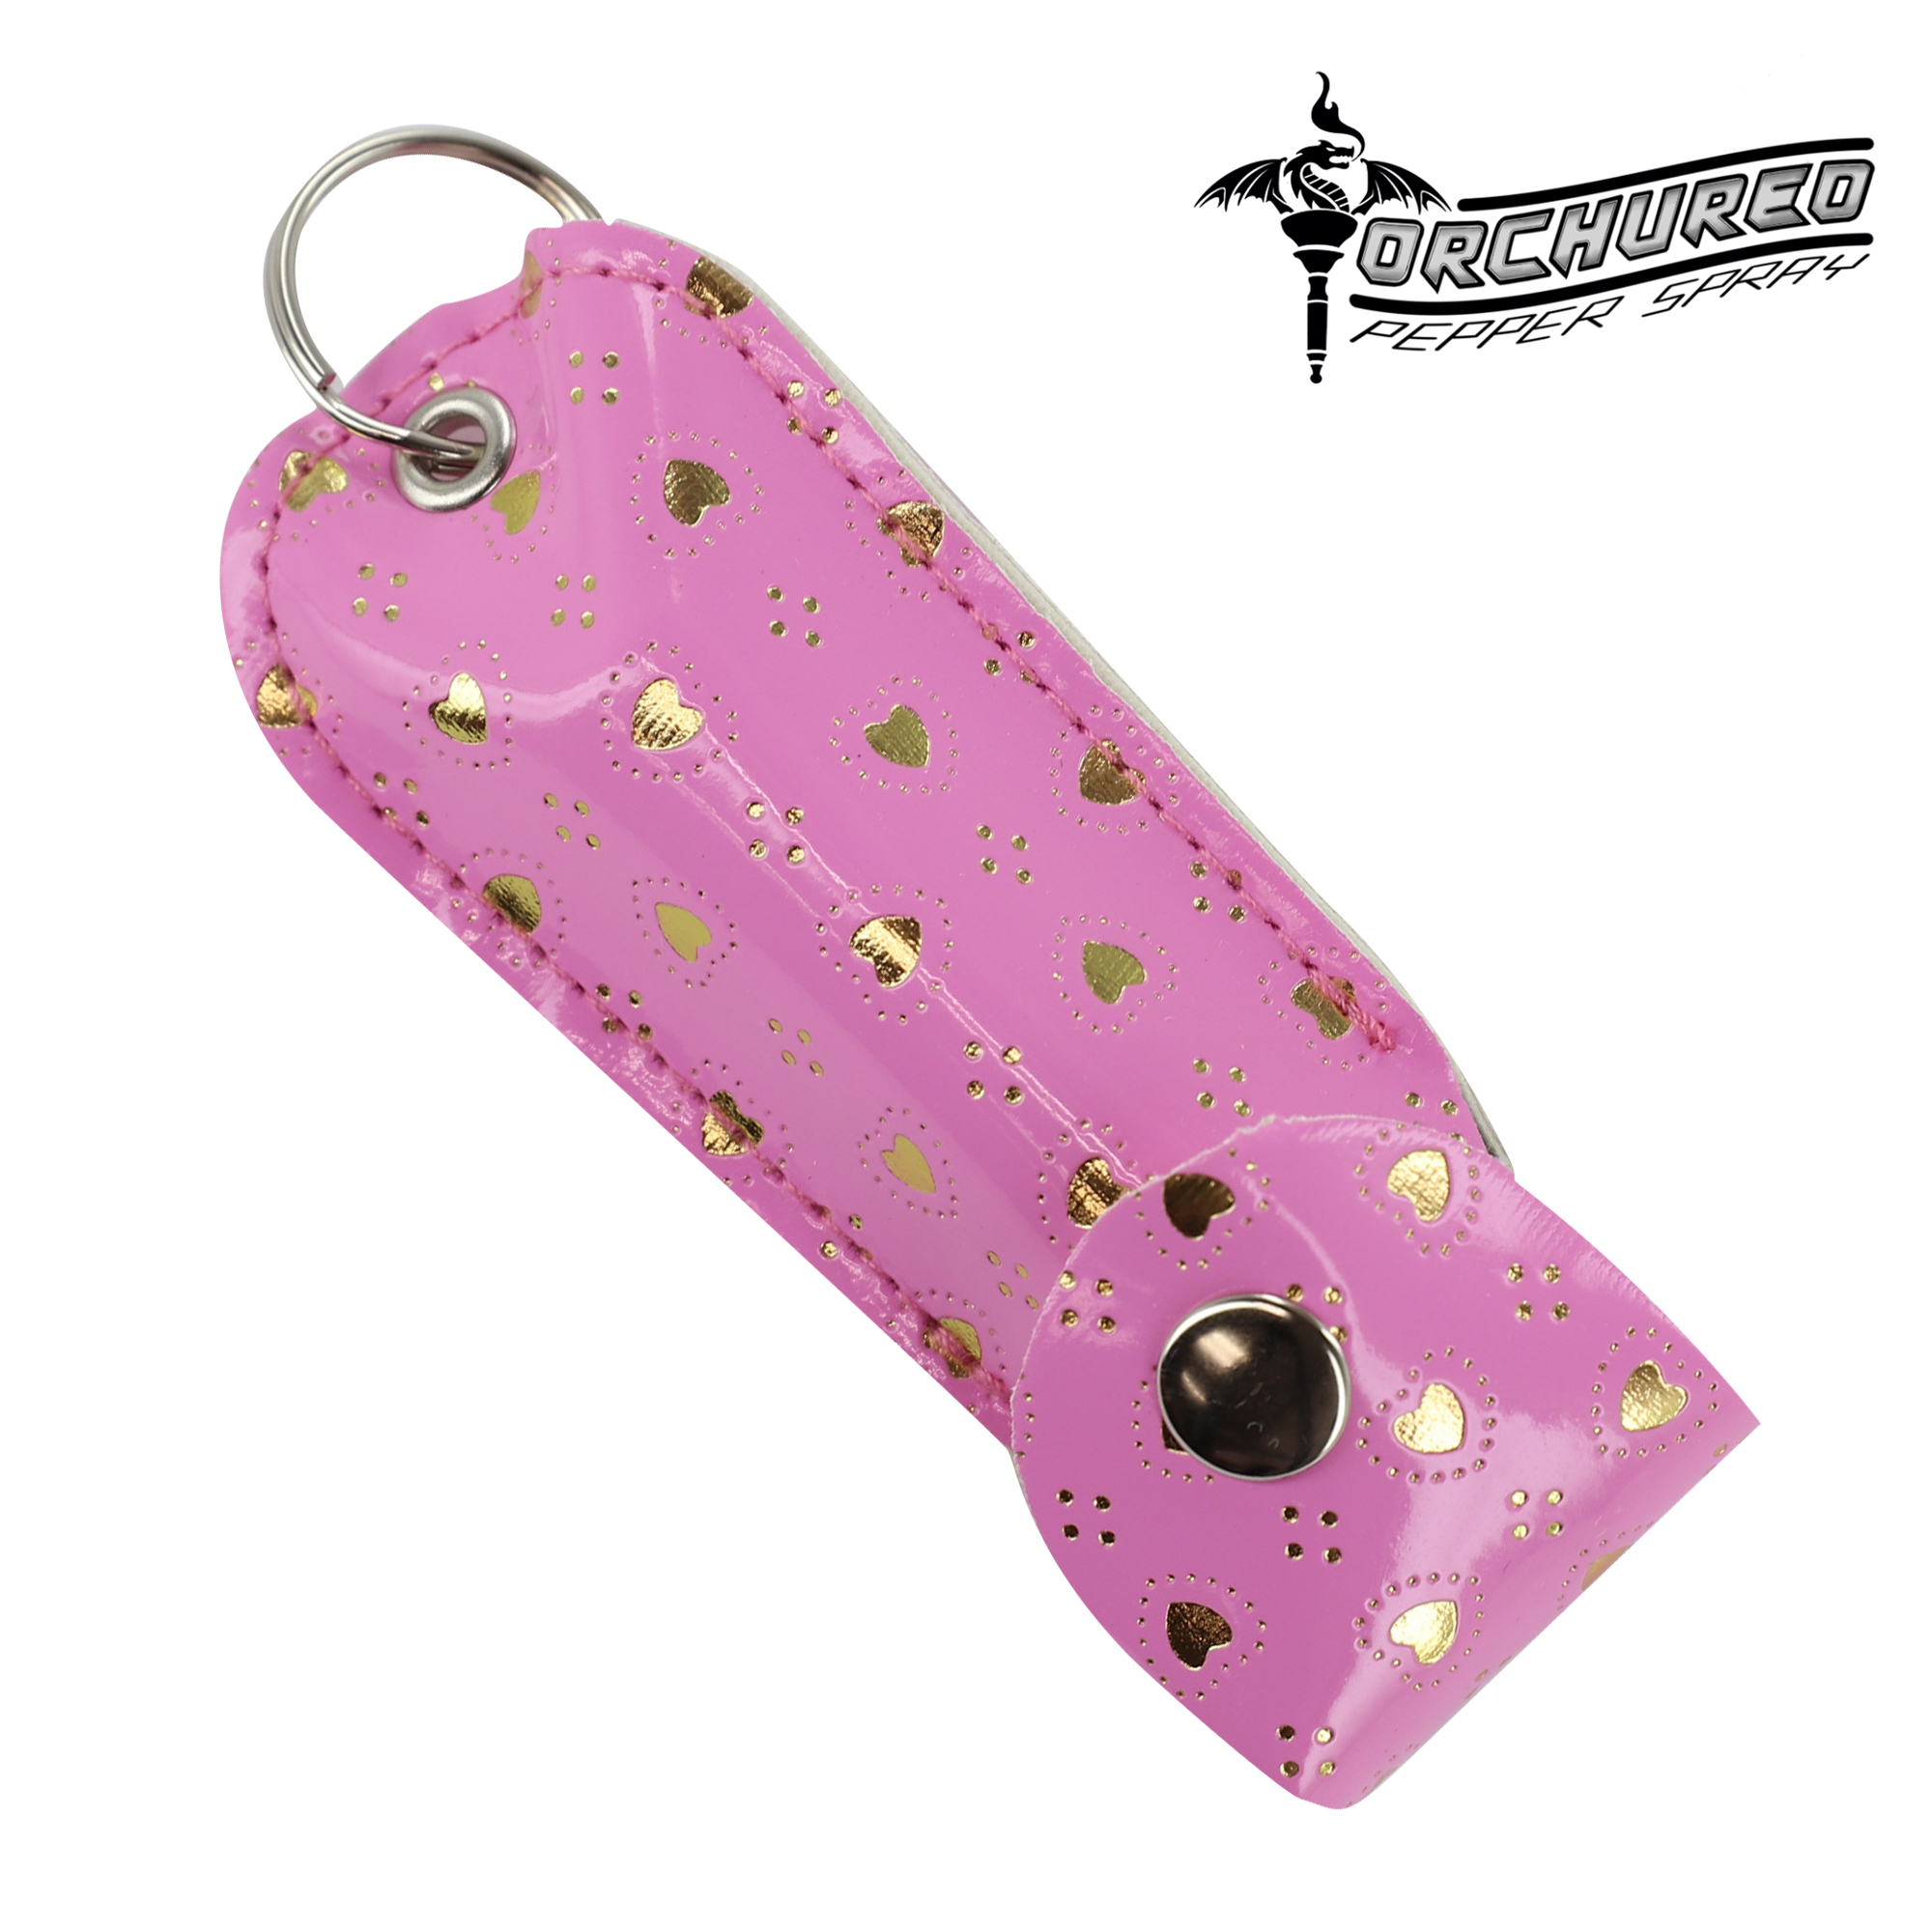 TORCHURED? Police Grade Maximum Strength Pepper Spray KEYCHAIN | Pink w/ Gold Hearts |